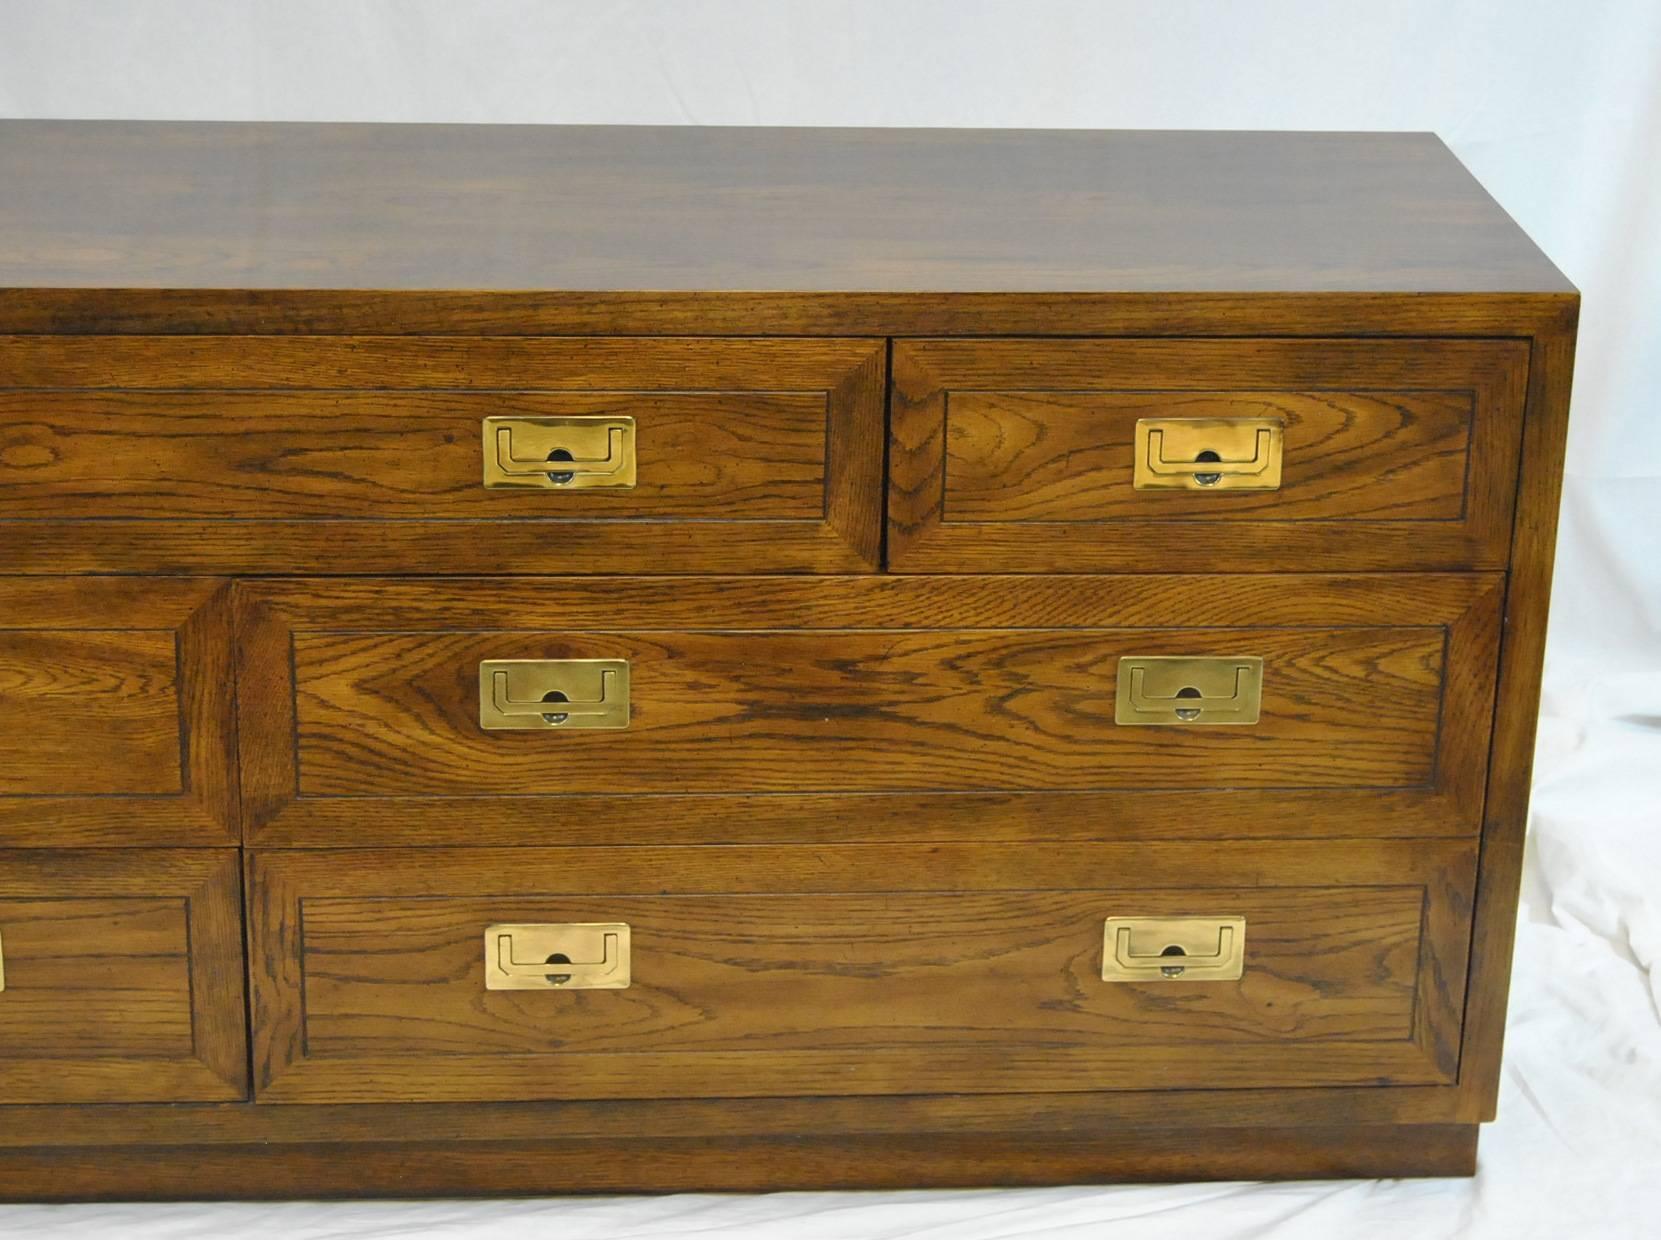 A great campaign style seven-drawer oak dresser by Henredon. This is part of their scene I collection and has clean campaign styling with heavy inset brass pulls. Two of the larger drawers are divided for organization of contents. This is 72